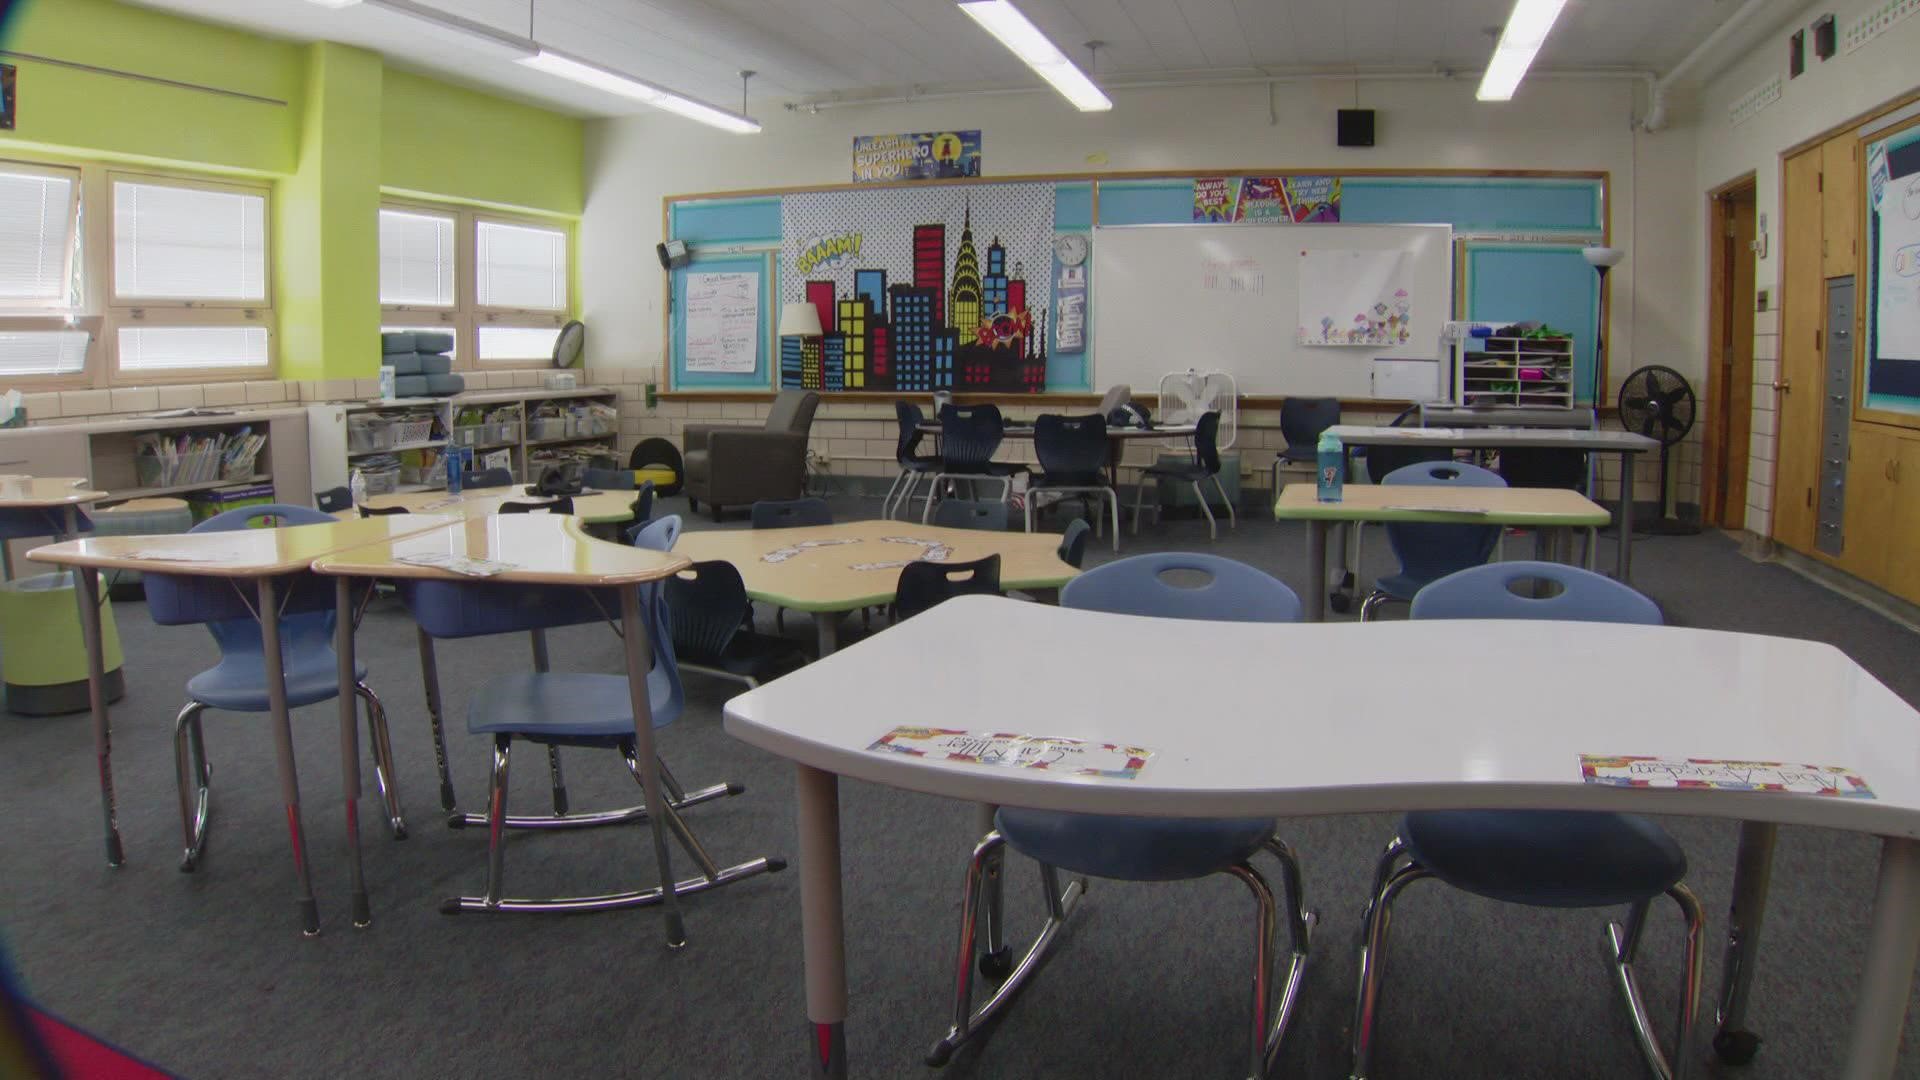 At least four schools in Denver Public Schools will release early over the coming days to avoid keeping kids in hot classrooms during a forecasted heat wave.